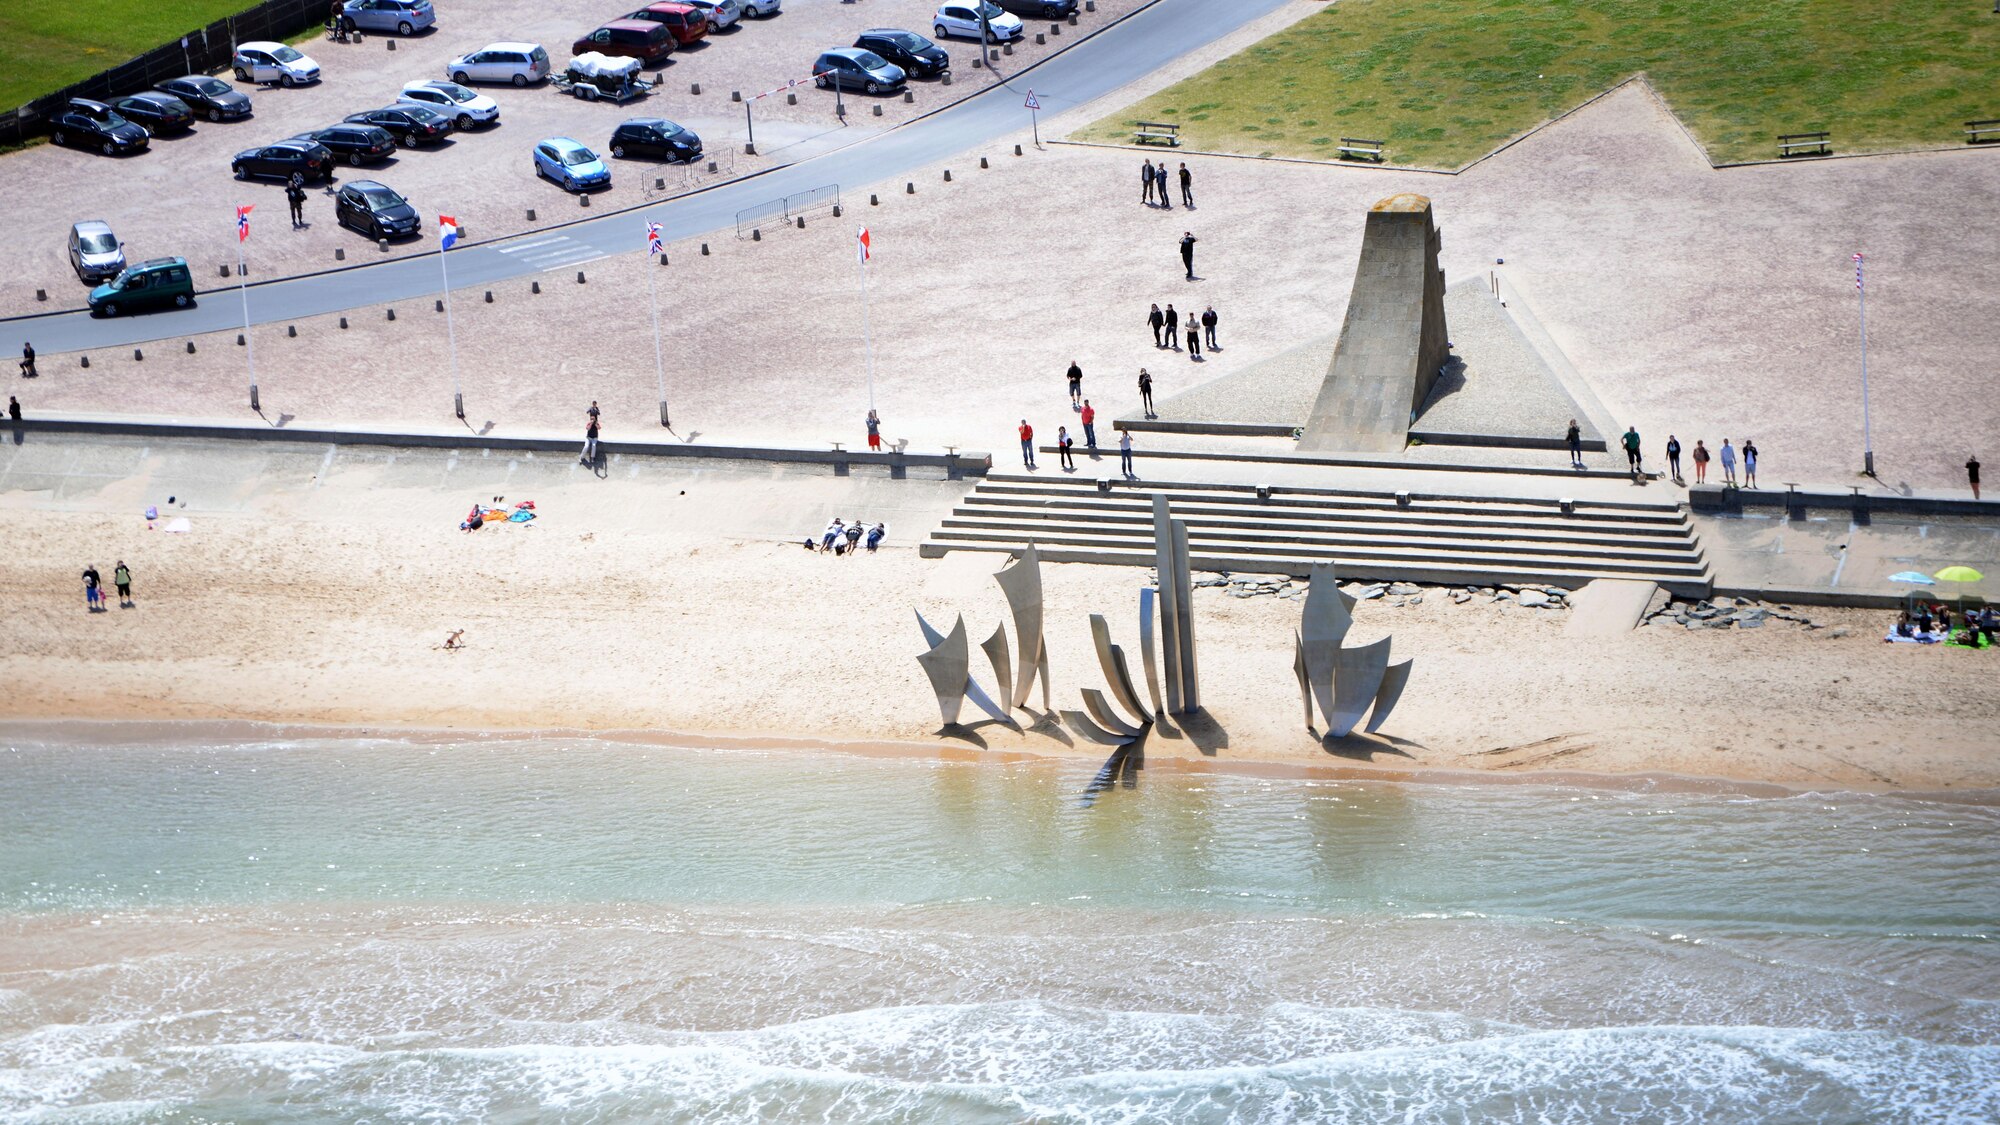 An aerial perspective of the memorial at Omaha Beach in Normandy, France, June 7, 2015, after the MC-130J Commando II aircrew from the 67th Special Operations Squadron dropped more than 60 U.S. Special Operations Command – Europe operators over the historic La Fiere drop zone outside of Sainte Mere Eglise, to commemorate the 71st anniversary of the D-Day landings. (U.S. Air Force photo by Tech. Sgt. Stacia Zachary)